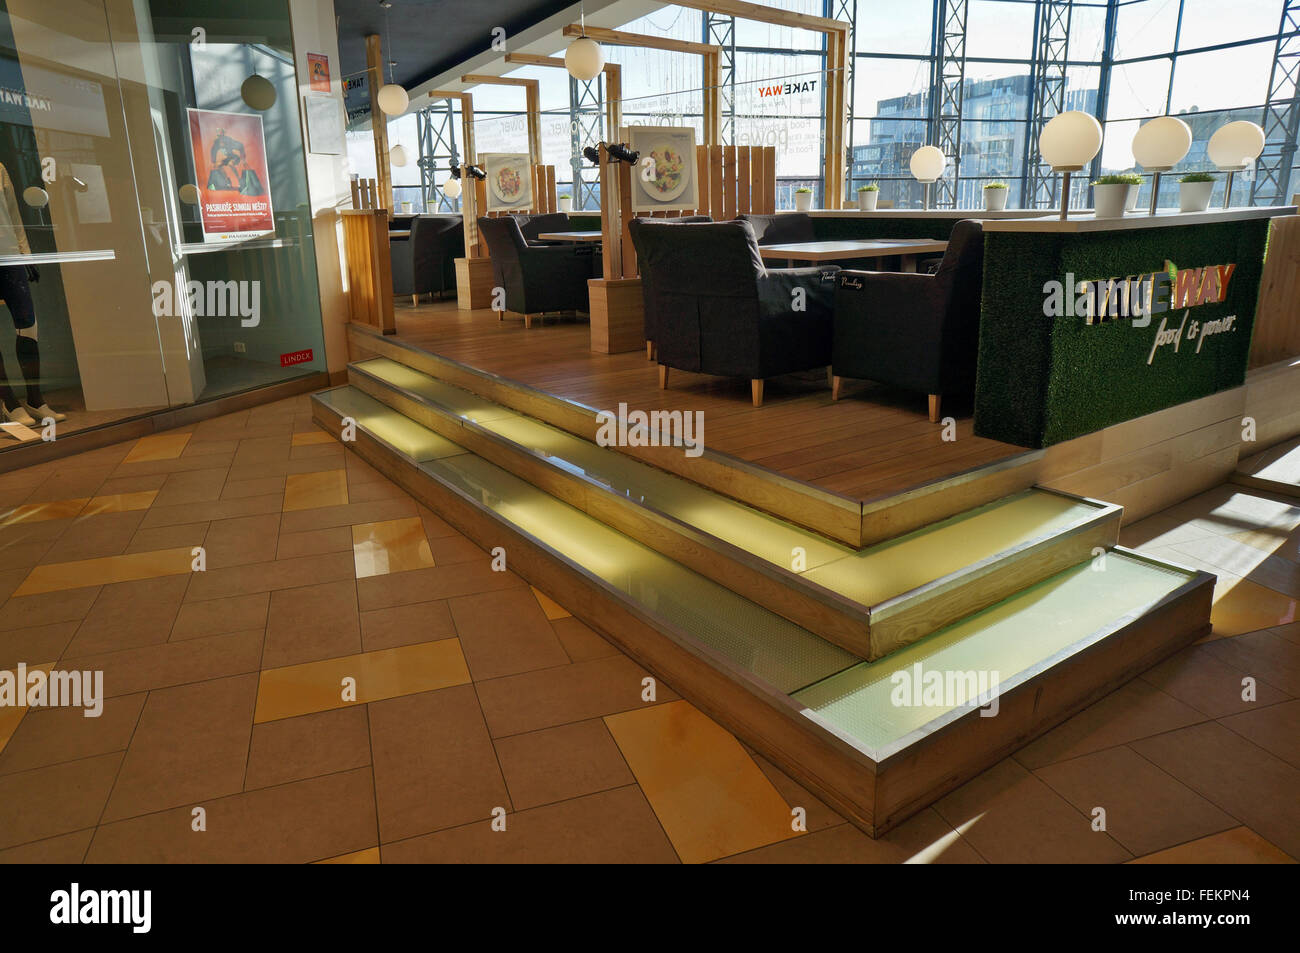 VILNIUS, LITHUANIA - JANUARY 16, 2016: Take Way original  brand cafe and snackbar in the largest city shopping center Panorama. Stock Photo